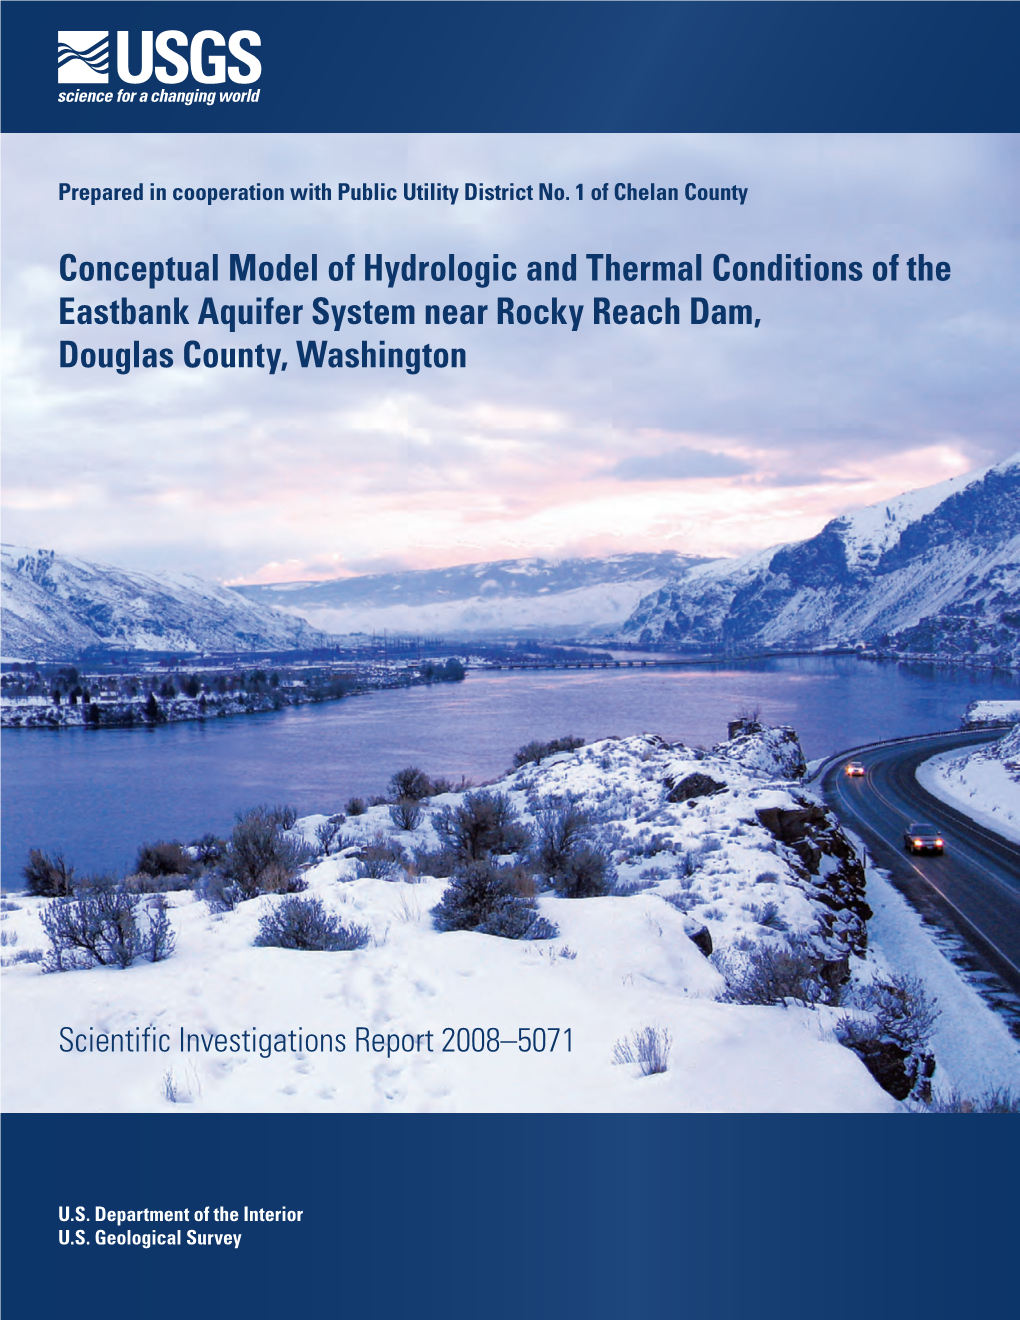 Conceptual Model of Hydrologic and Thermal Conditions of the Eastbank Aquifer System Near Rocky Reach Dam, Douglas County, Washington